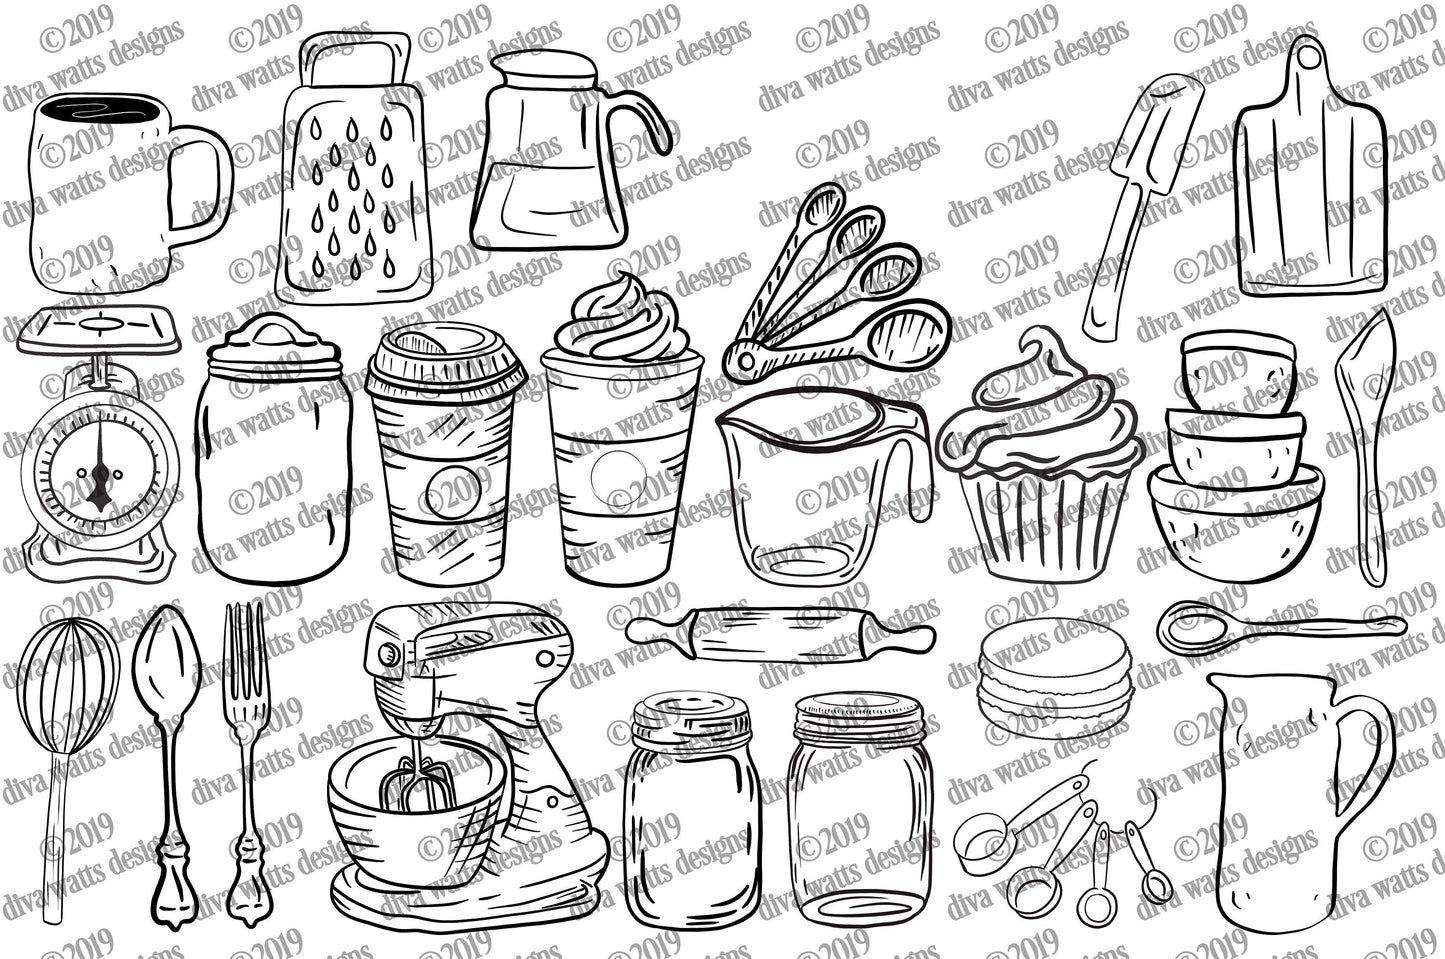 25 Hand Drawn SVG Clipart Farmhouse Kitchen | PSD DXF eps png Cutting Files | Instant Download | Retro Vintage Designs Mason Jar Mixer More